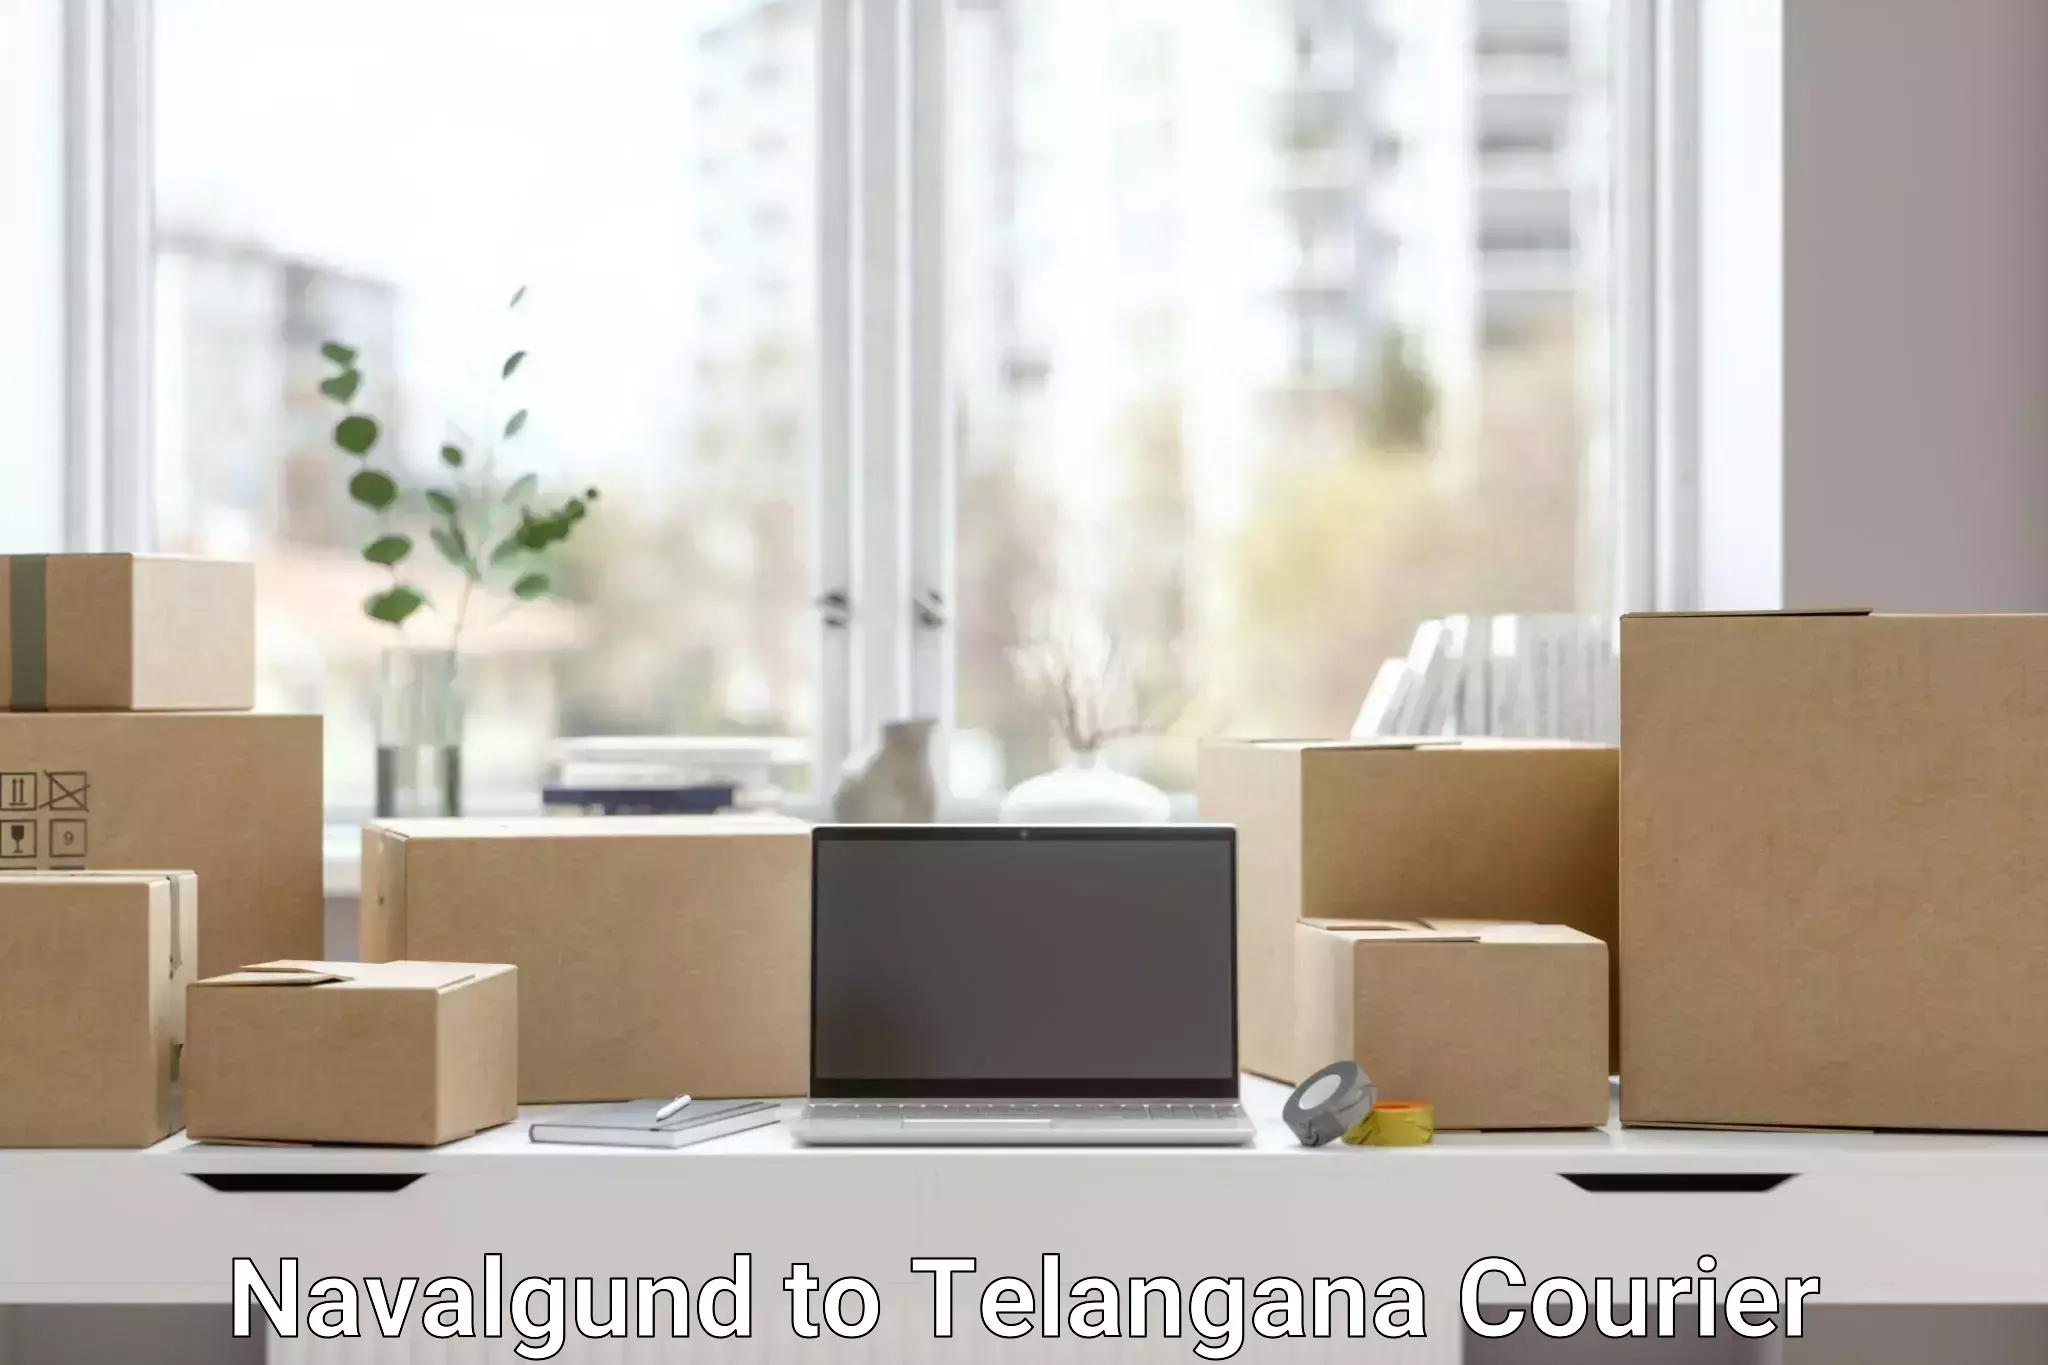 Parcel service for businesses Navalgund to Telangana